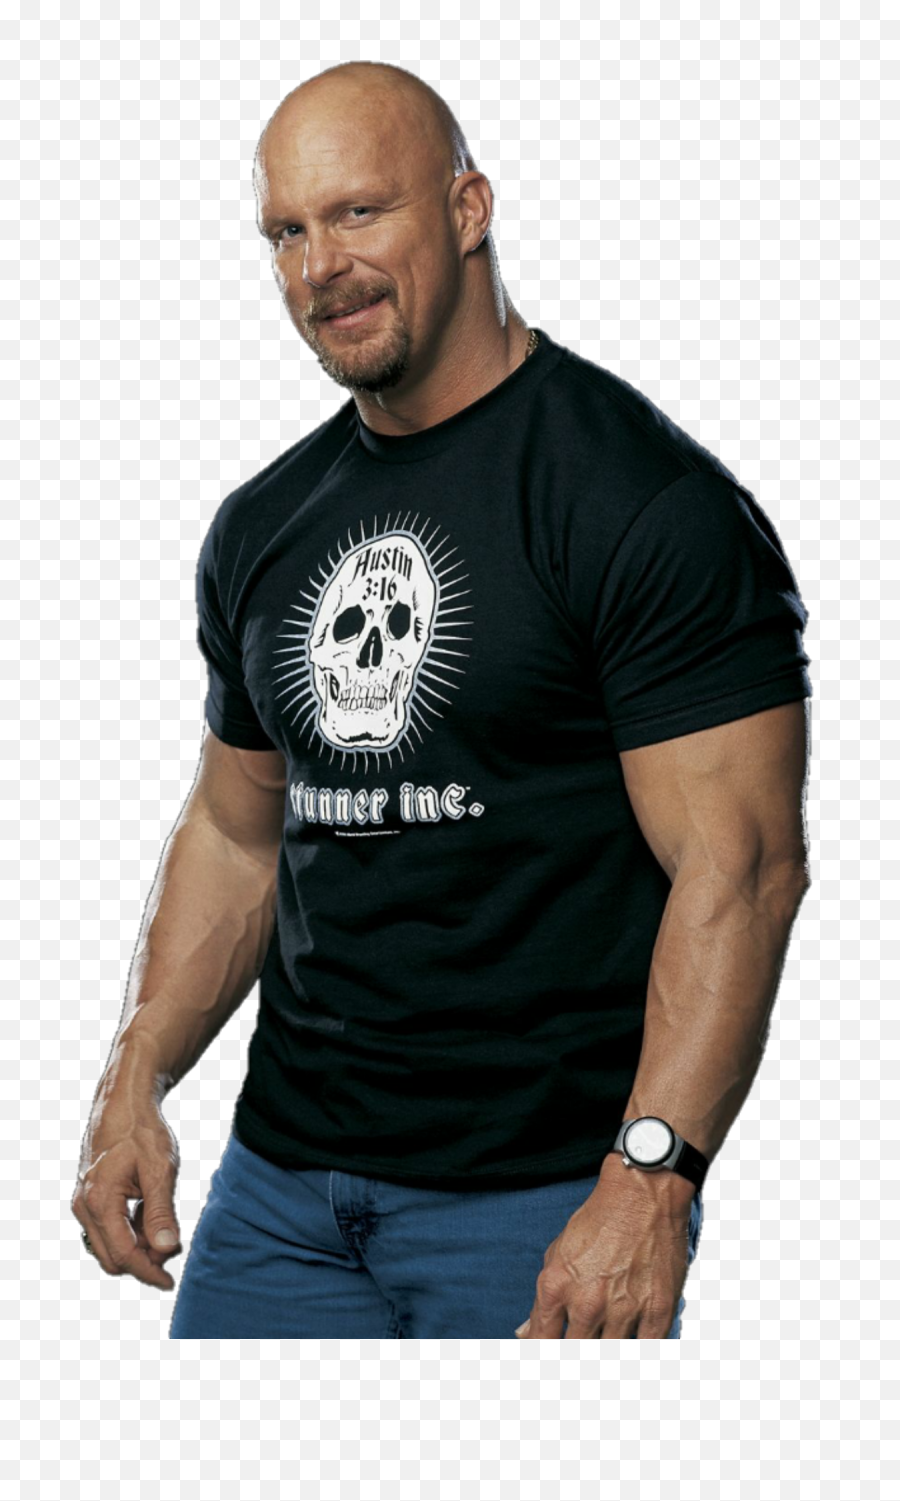 Download 10 Best Stone Cold Steve - Strong Cold Steve Austin Png,Stone Cold Steve Austin Png